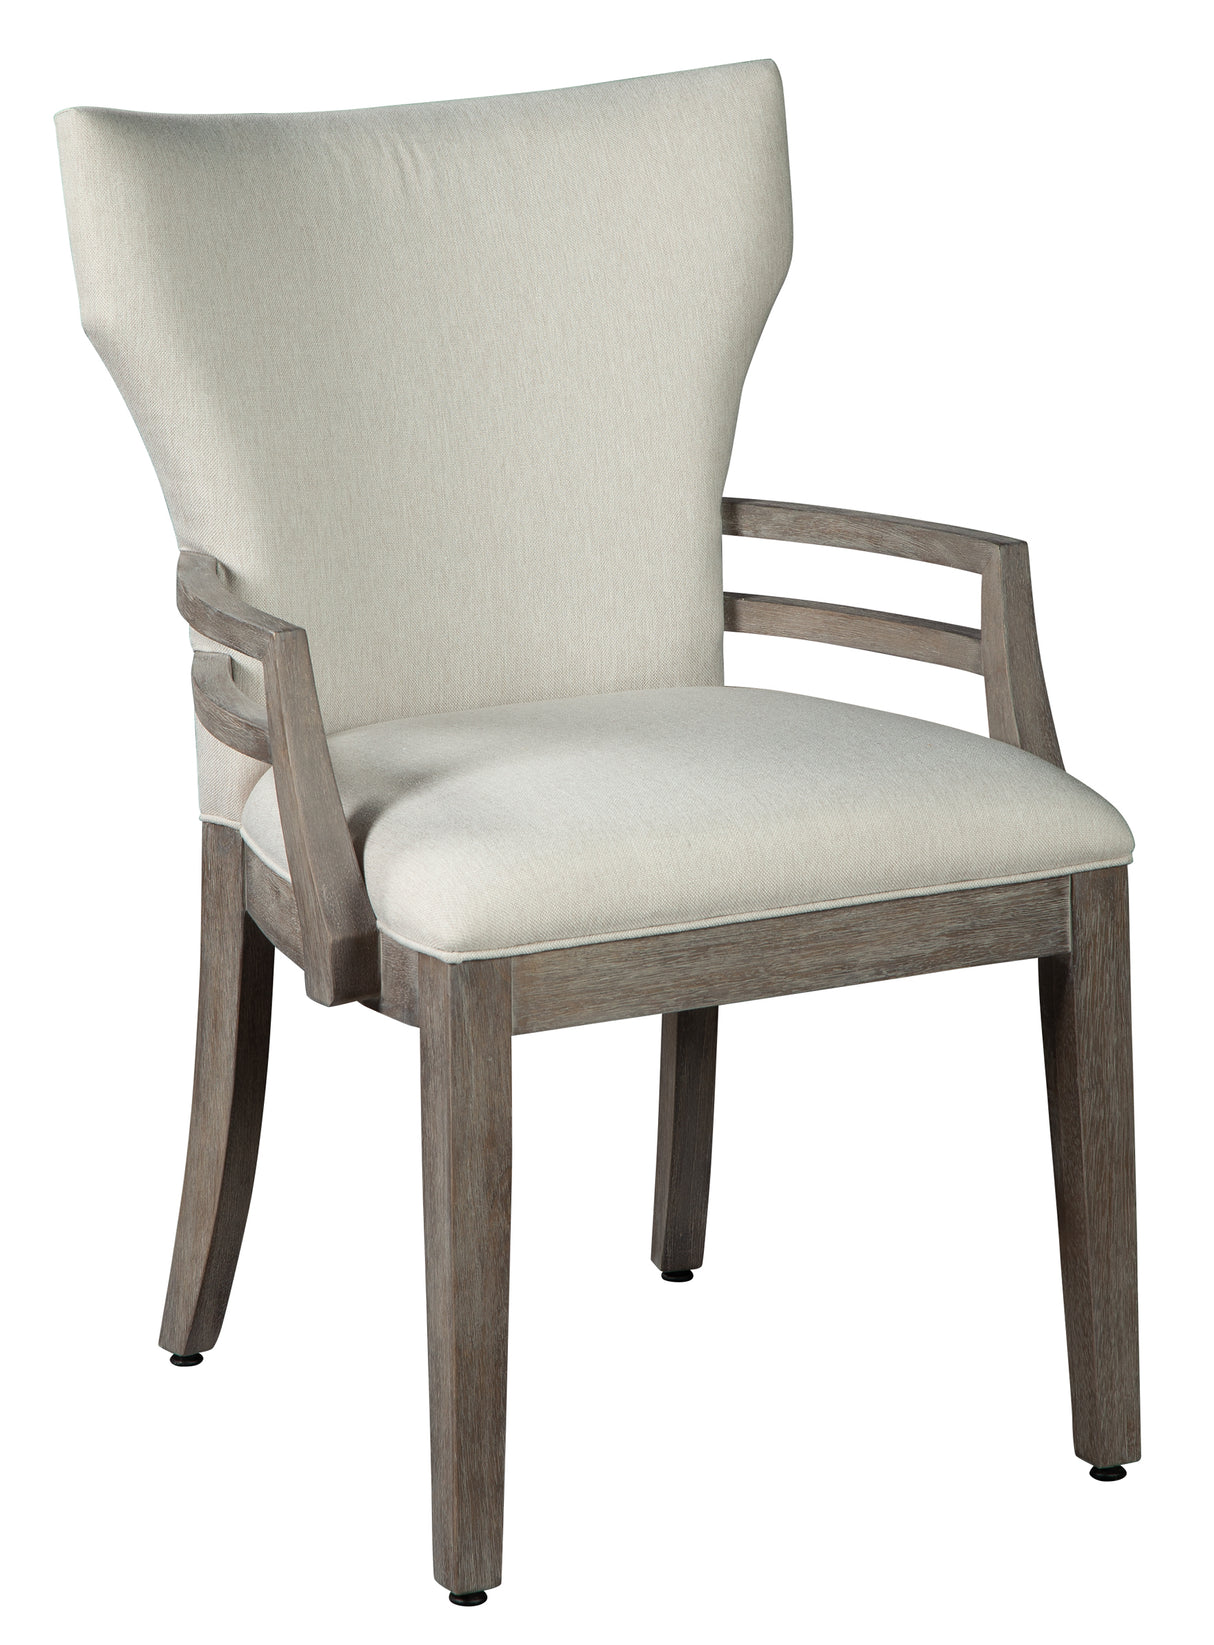 Hekman 24522 Sedona 21.75in. x 25.5in. x 35.5in. Upholstered Dining Arm Chair